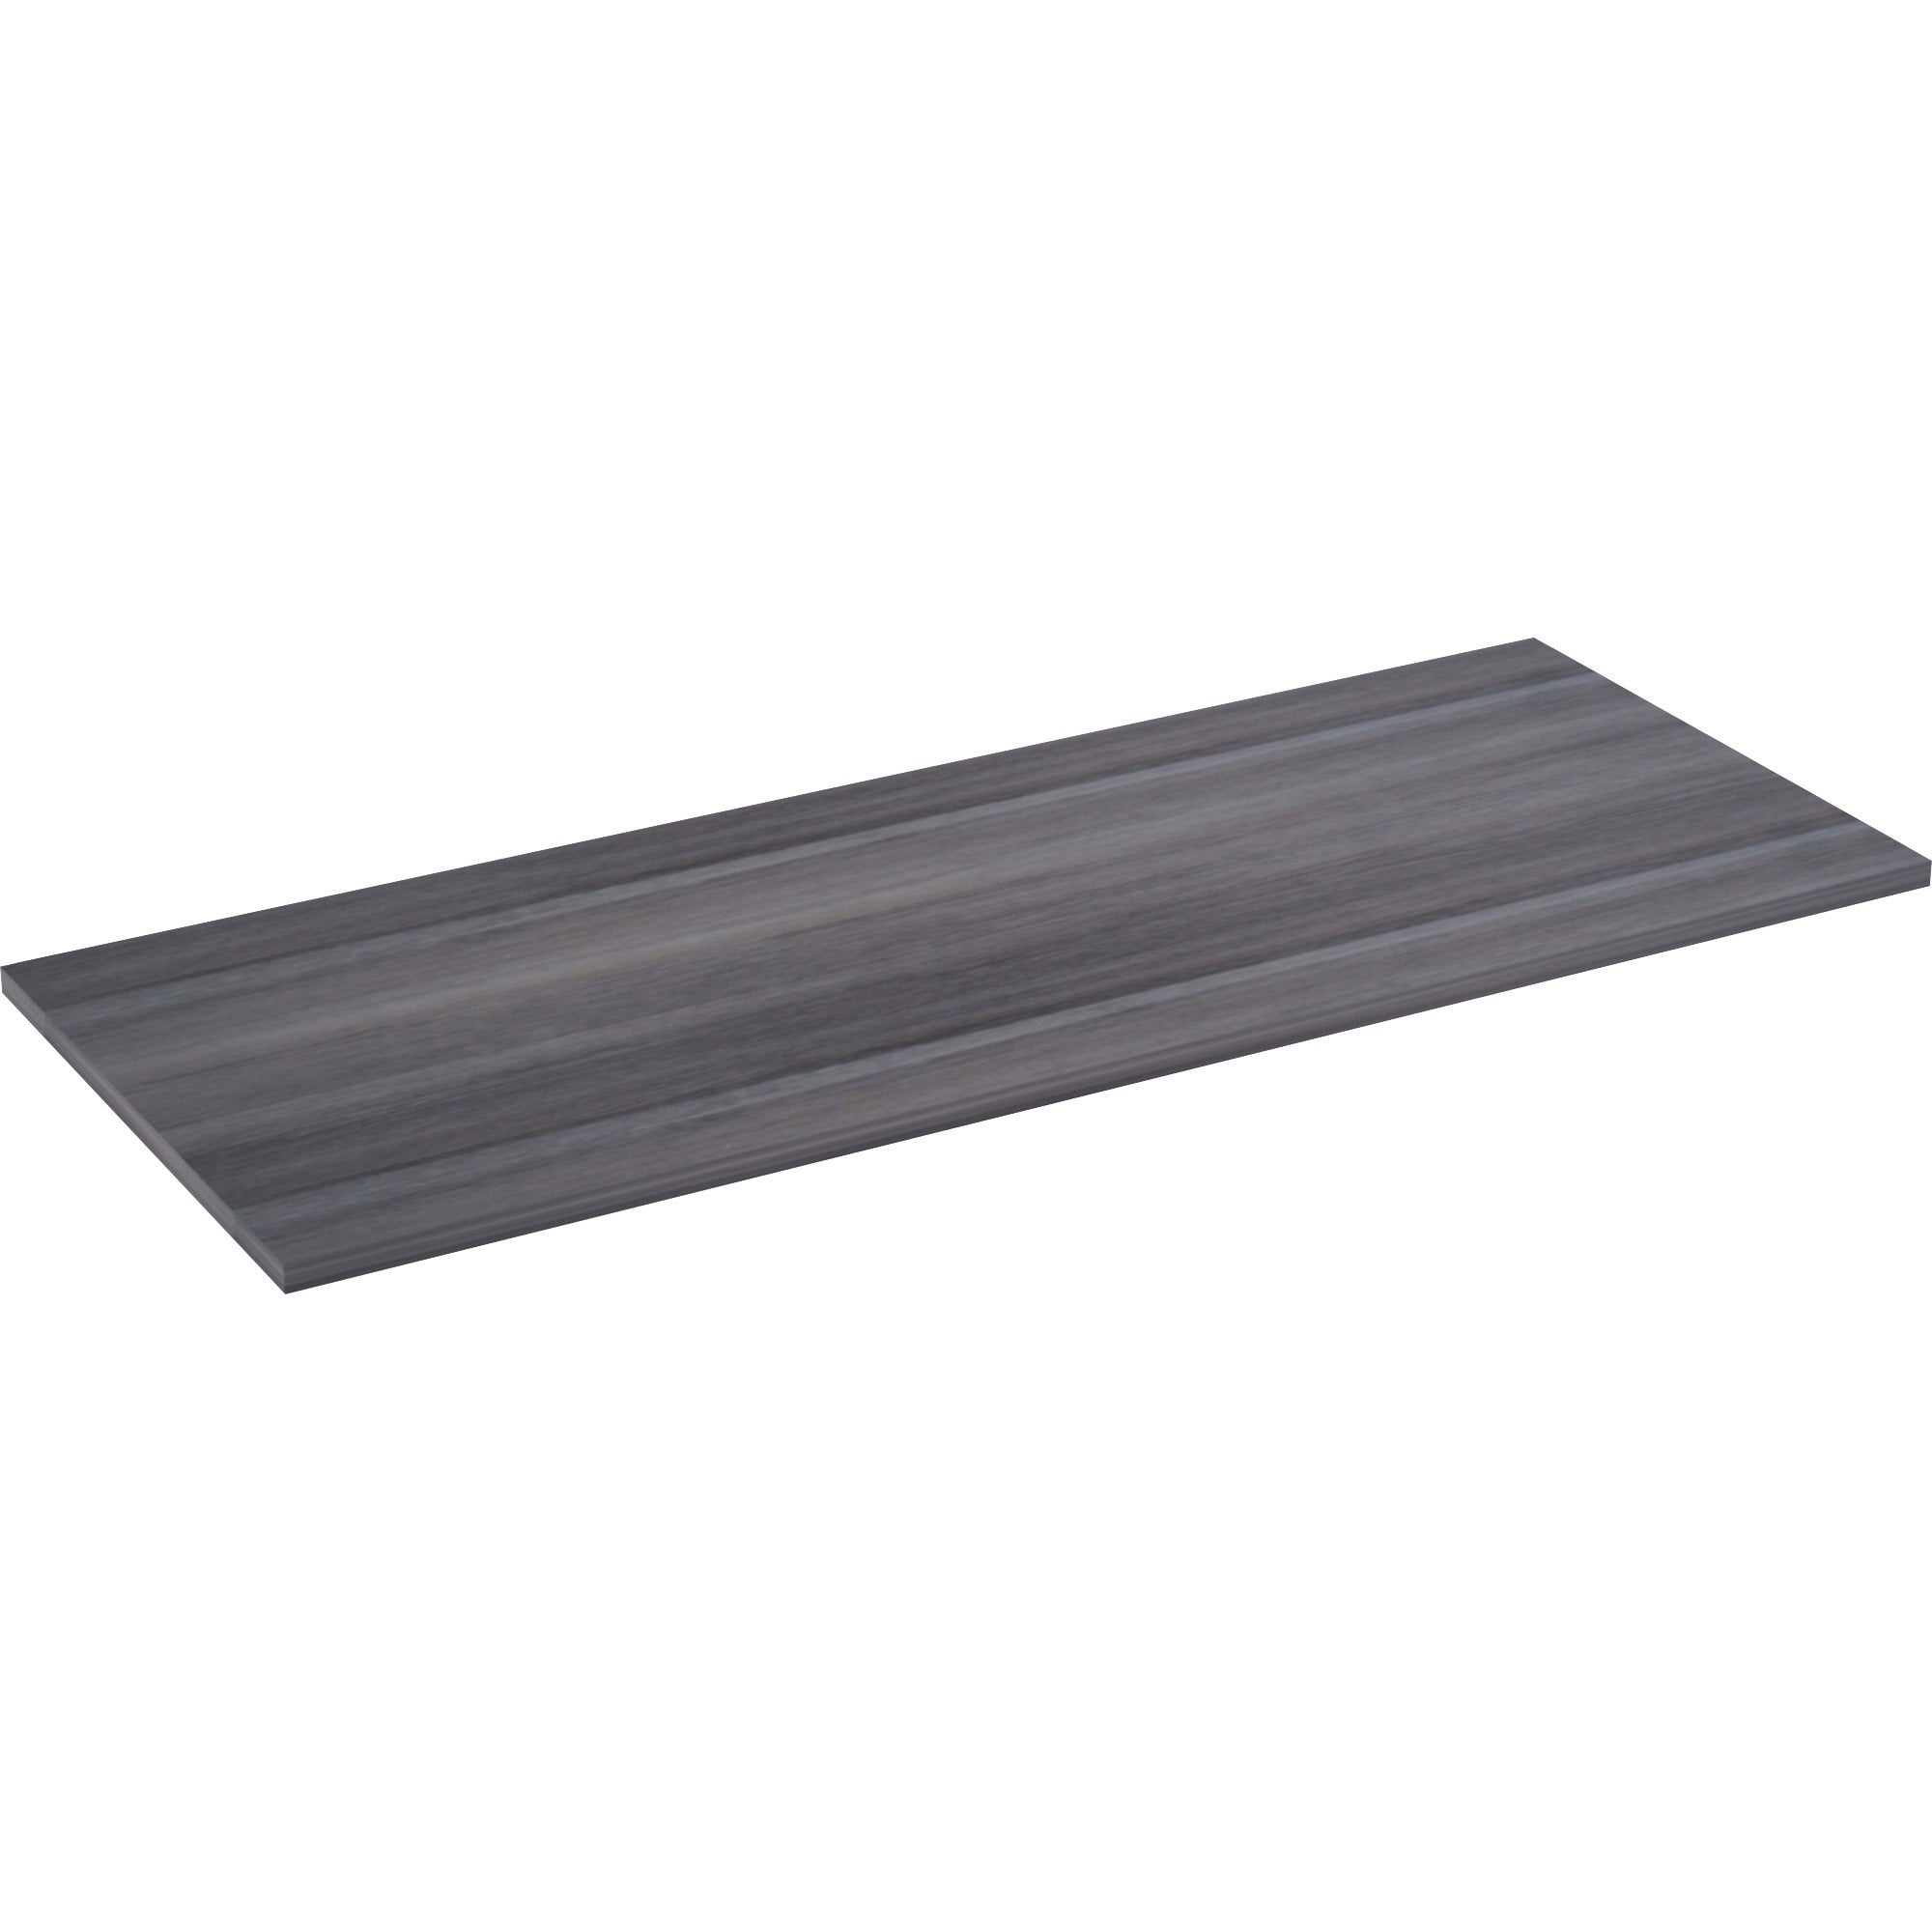 lorell-relevance-series-tabletop-599-x-236-x-1-table-top-straight-edge-finish-charcoal-laminate_llr16202 - 2